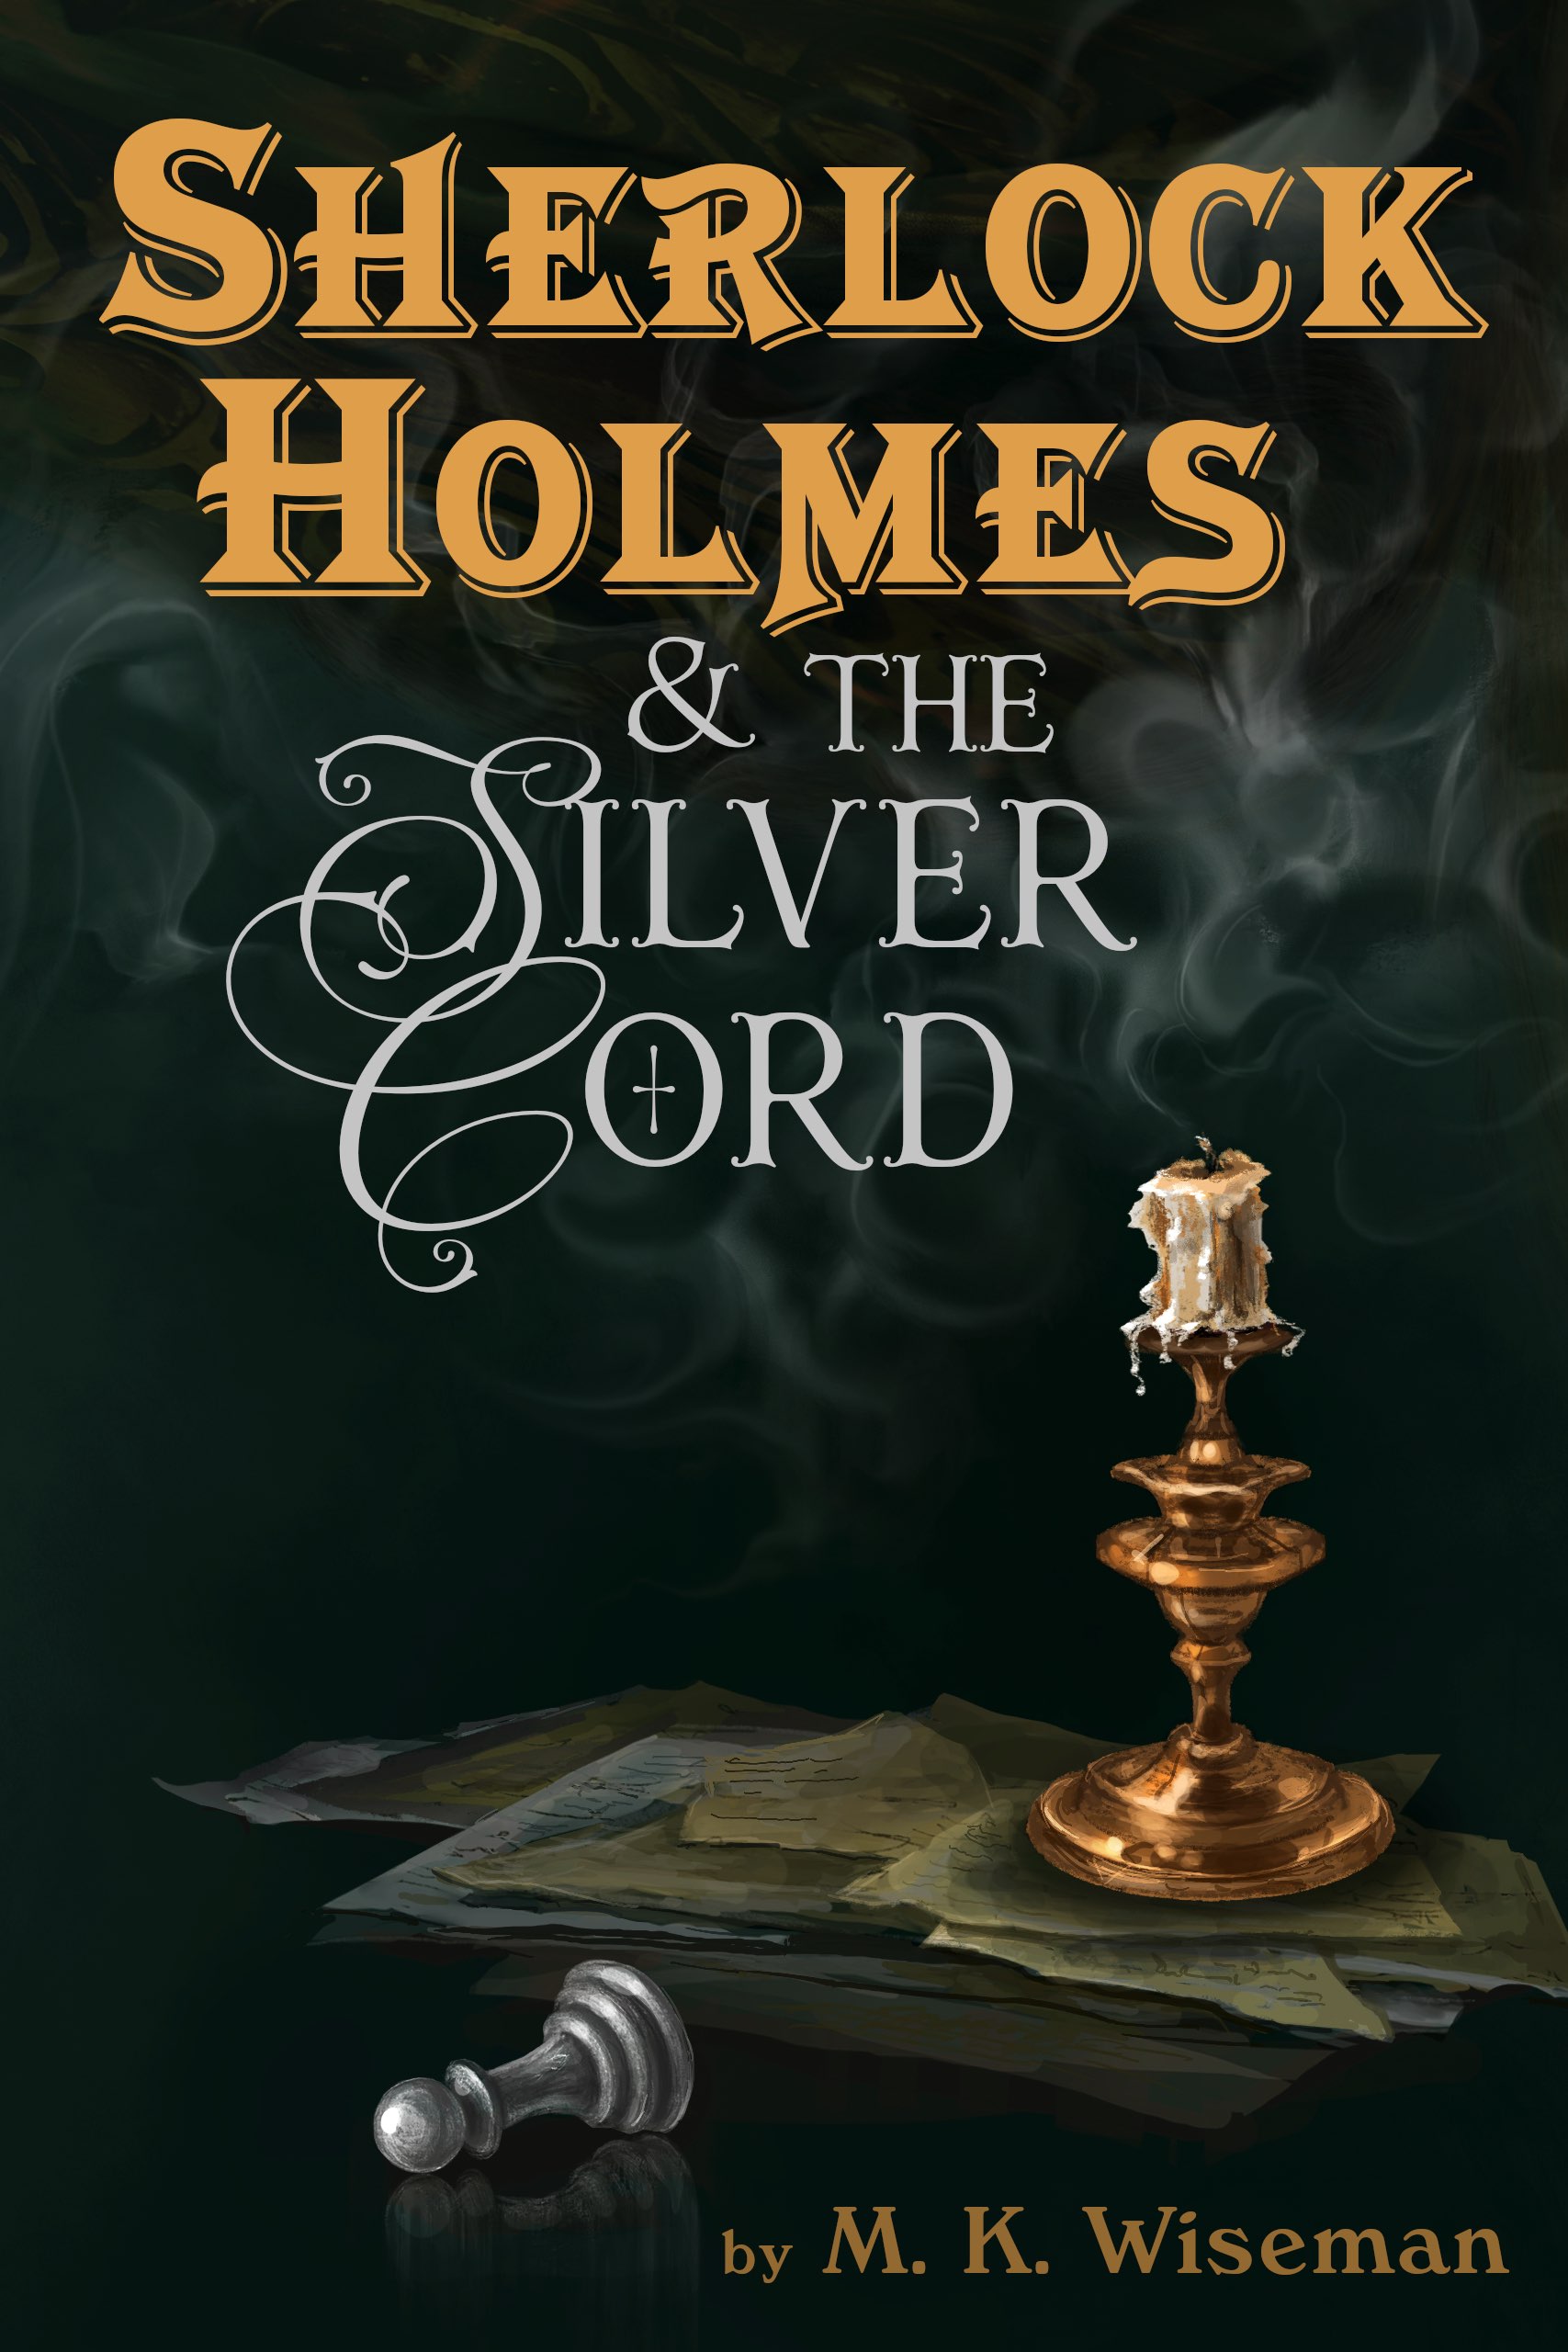 Cover for Sherlock Holmes & the Silver Cord depicting an extinguished candle, white pawn chess piece, and various sheets of paper all set against a dark green background.